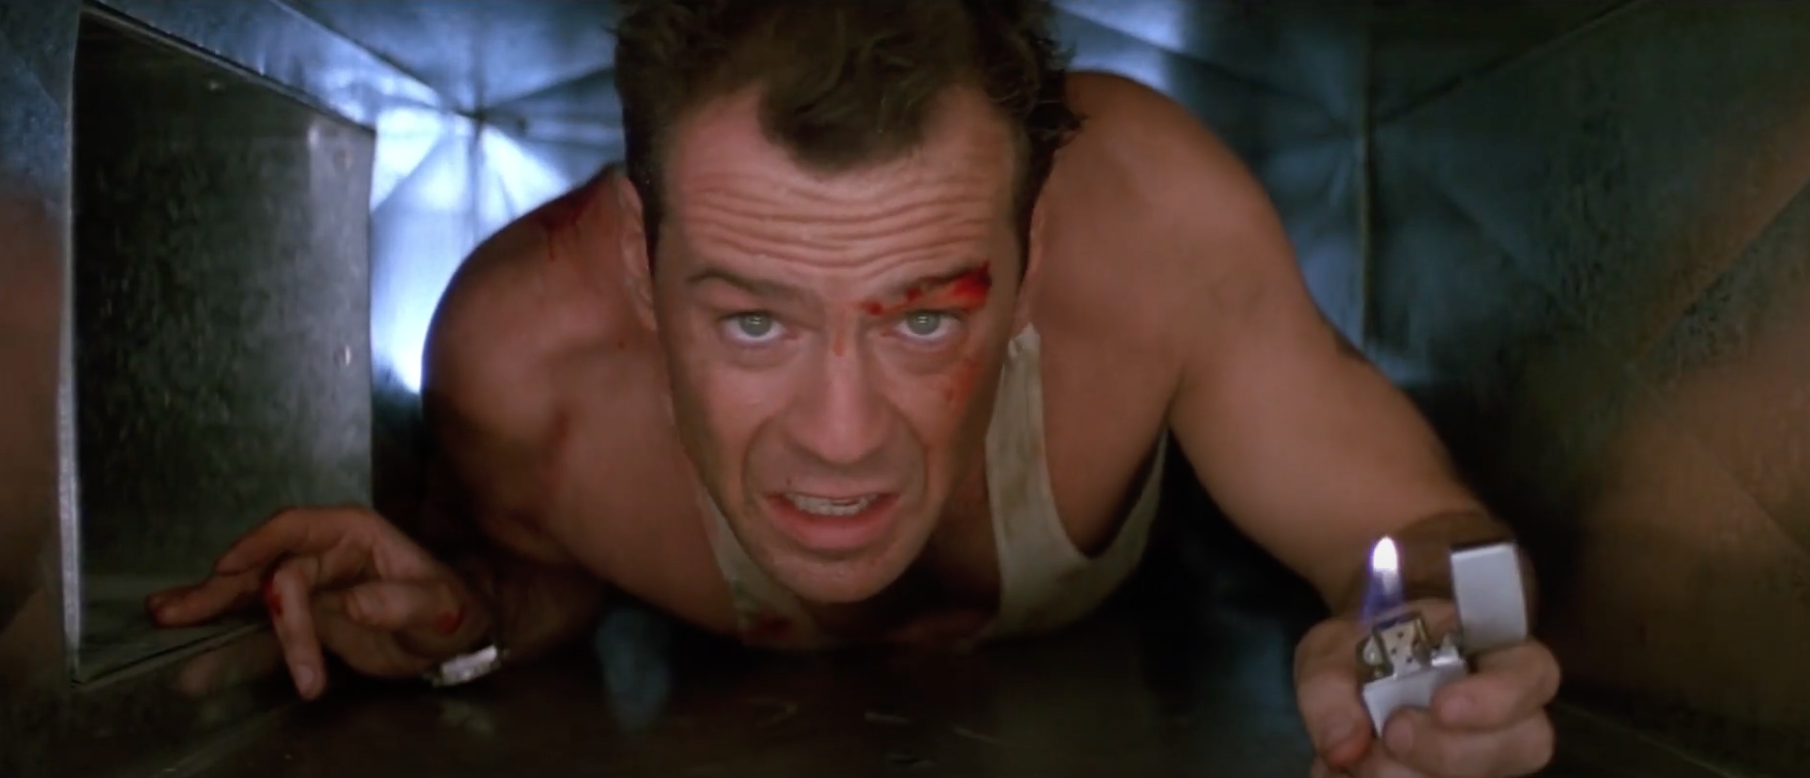 Climbing through air duct with lighter in &quot;Die Hard&quot; 